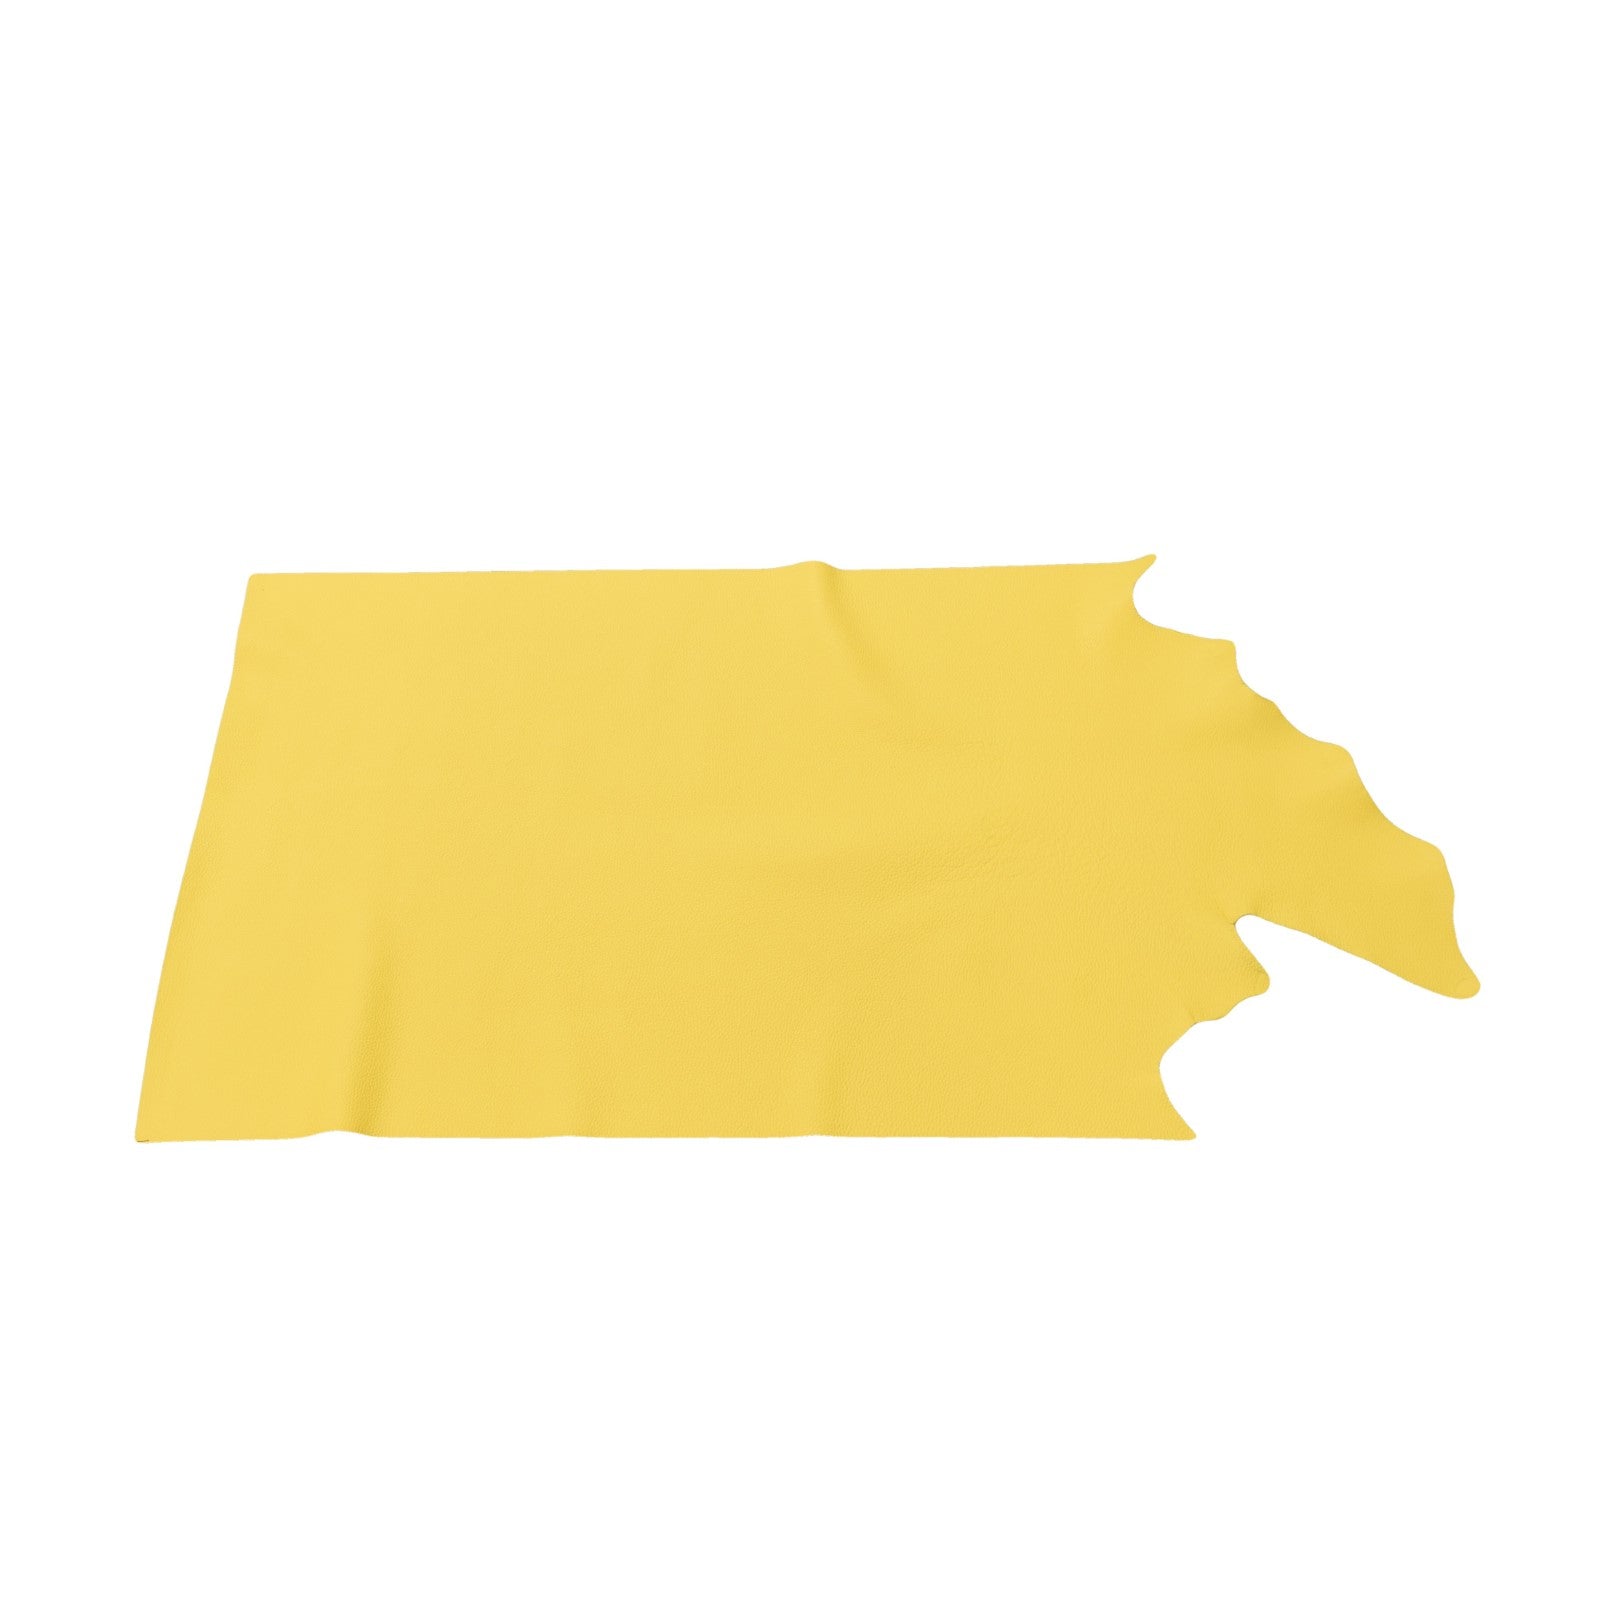 Hawkeye Yellow, 3-4 oz Cow Hides, Tried n True, 6.5-7.5 Square Foot / Project Piece (Middle) | The Leather Guy